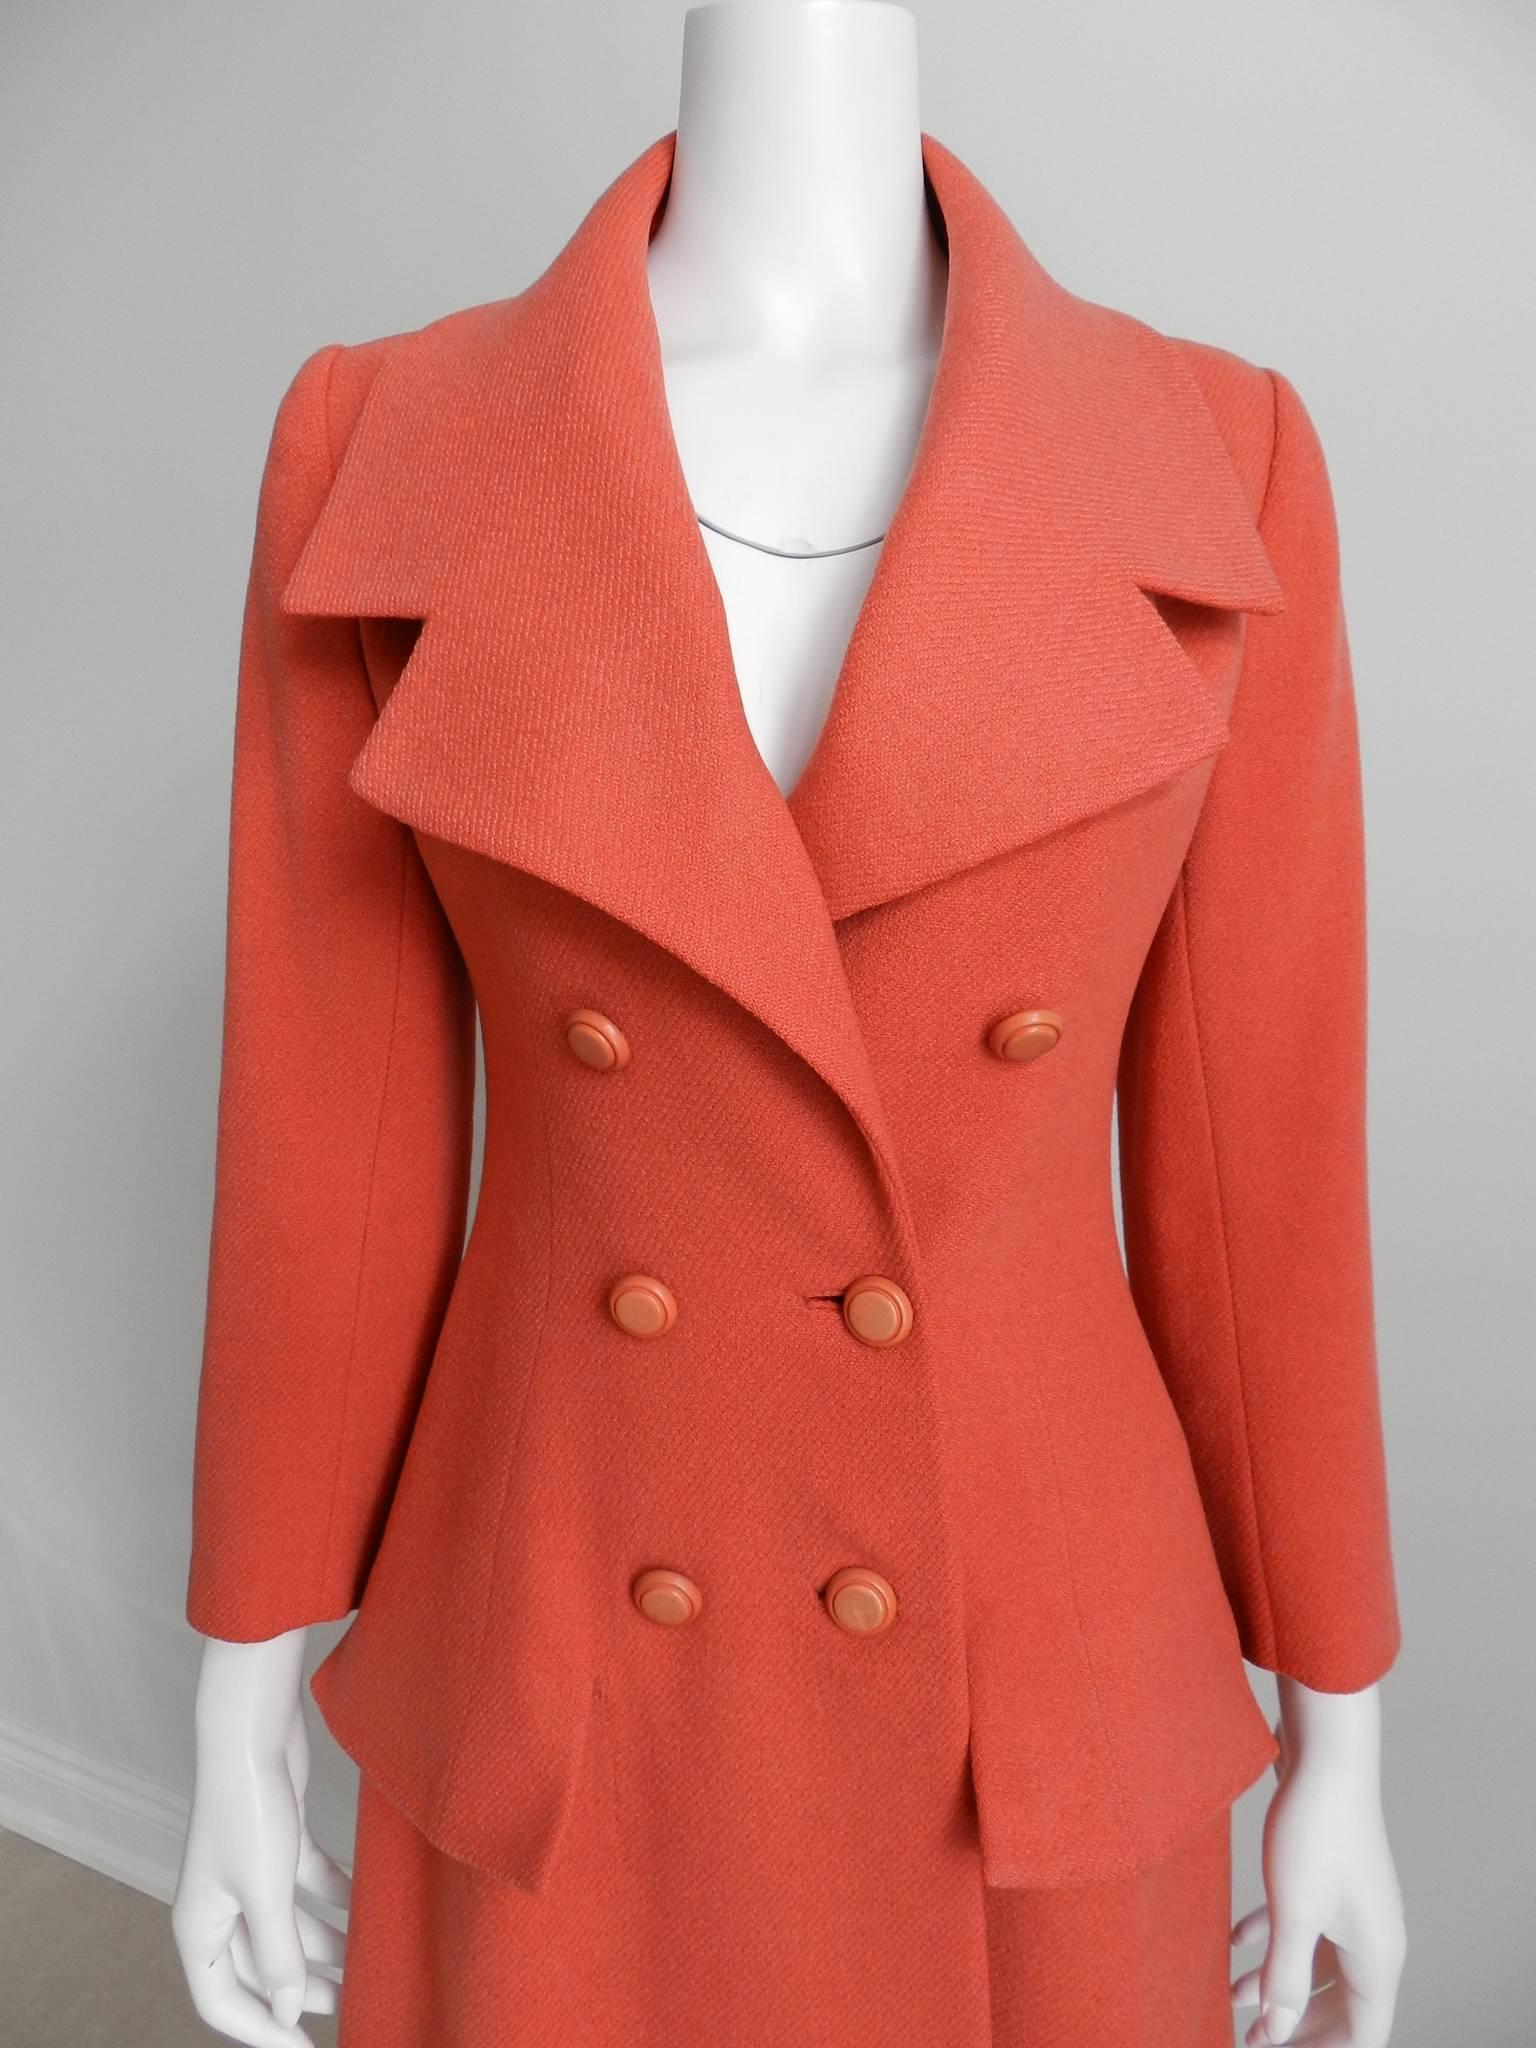 Christian Dior vintage salmon wool coat. Circa late 1950's / early 1960's. Label reads "Christian Dior original in Canada Excusive with Holt renfrew and Co. Limited."  Garment measures 37" at bust and is recommended for about